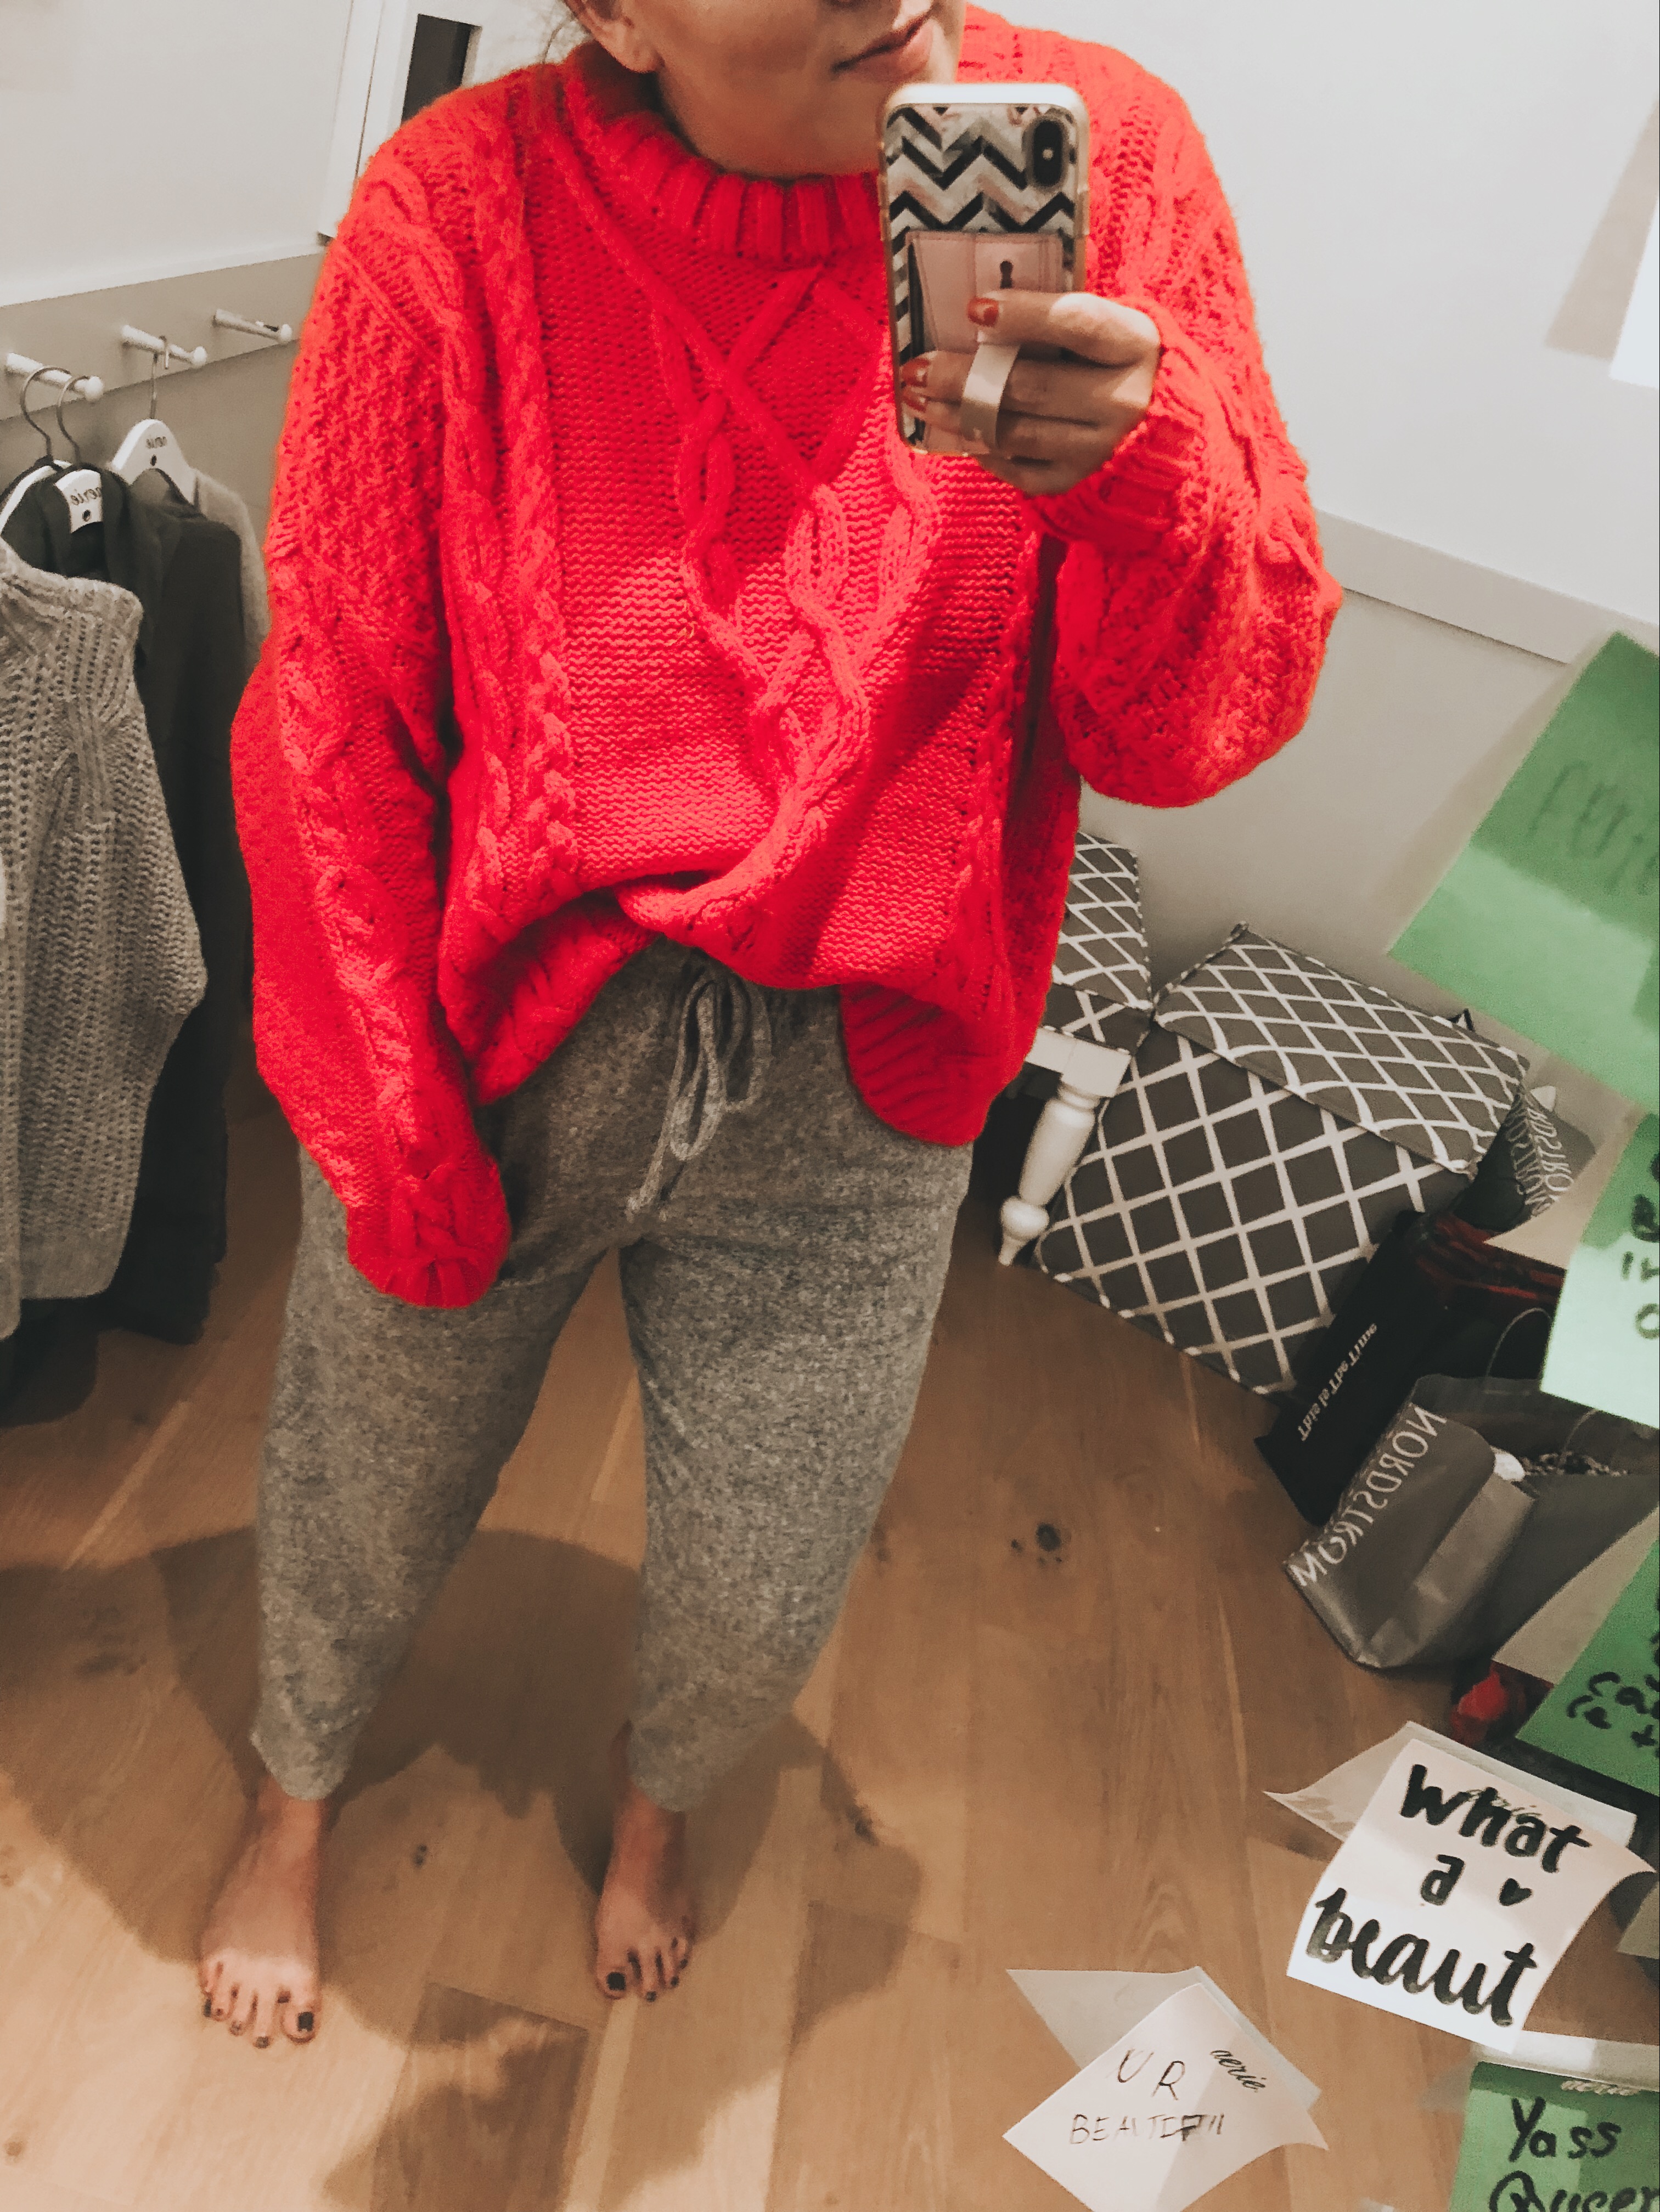 San Francisco Blogger, Ashley Zeal, from Two Peas in a Prada takes you inside the the dressing room for an Aerie Try On Session.